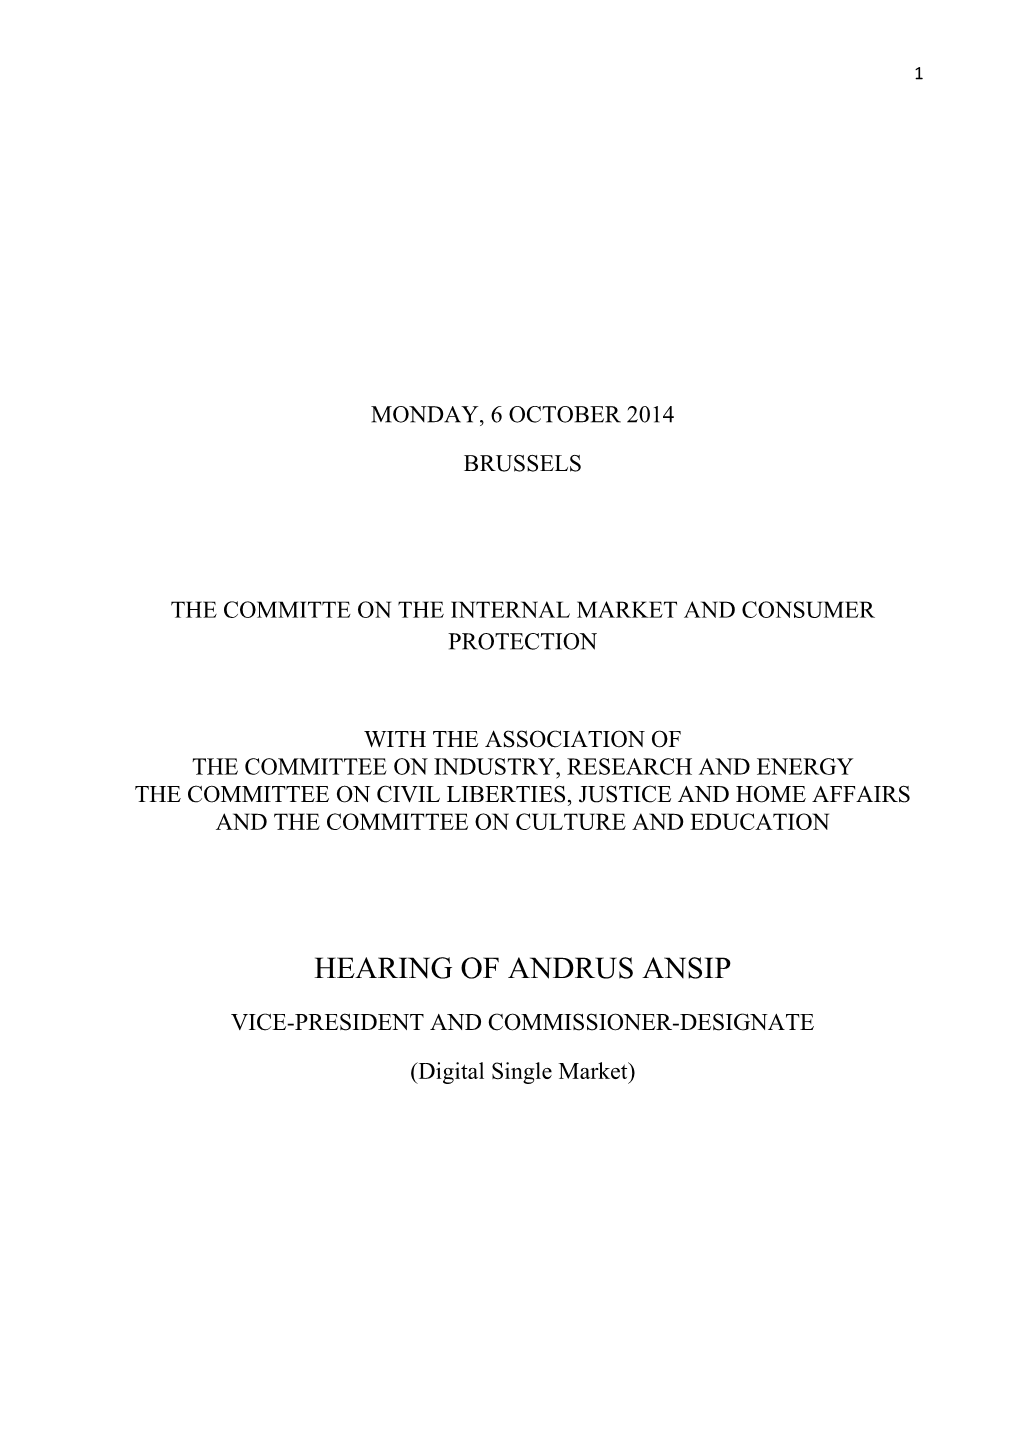 Hearing of Andrus Ansip